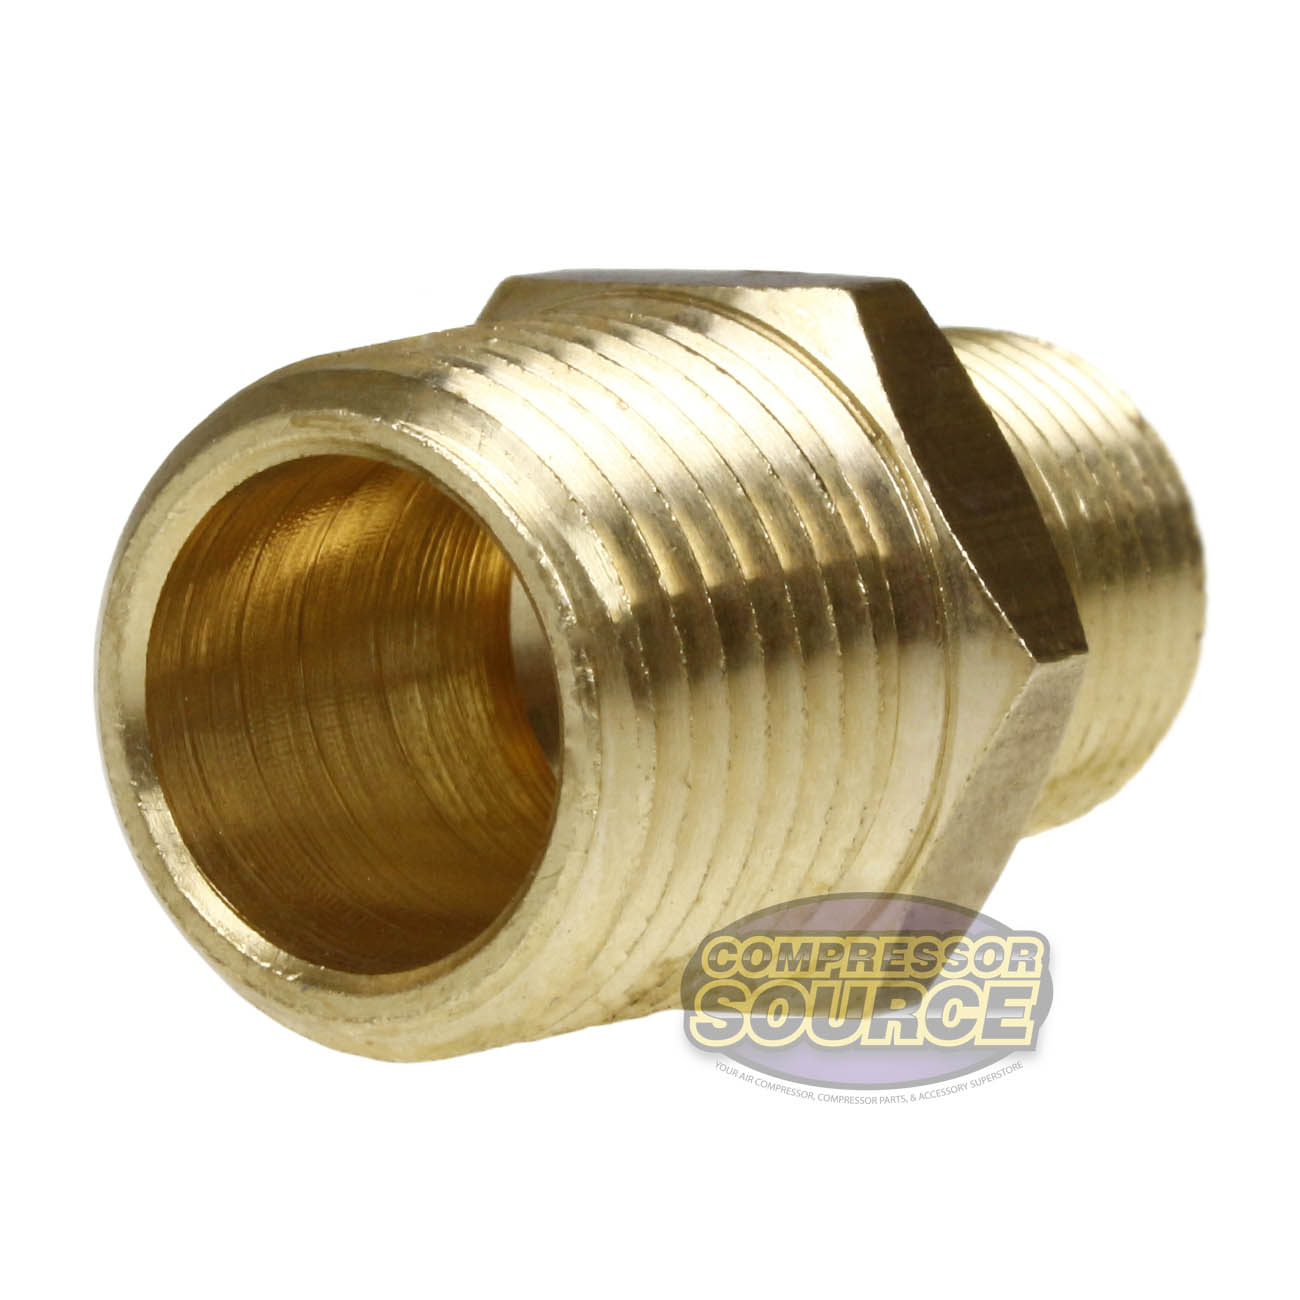 1/2" x 3/8" Male NPTF Pipe Reducing Hex Nipple Solid Brass Pipe Fitting New